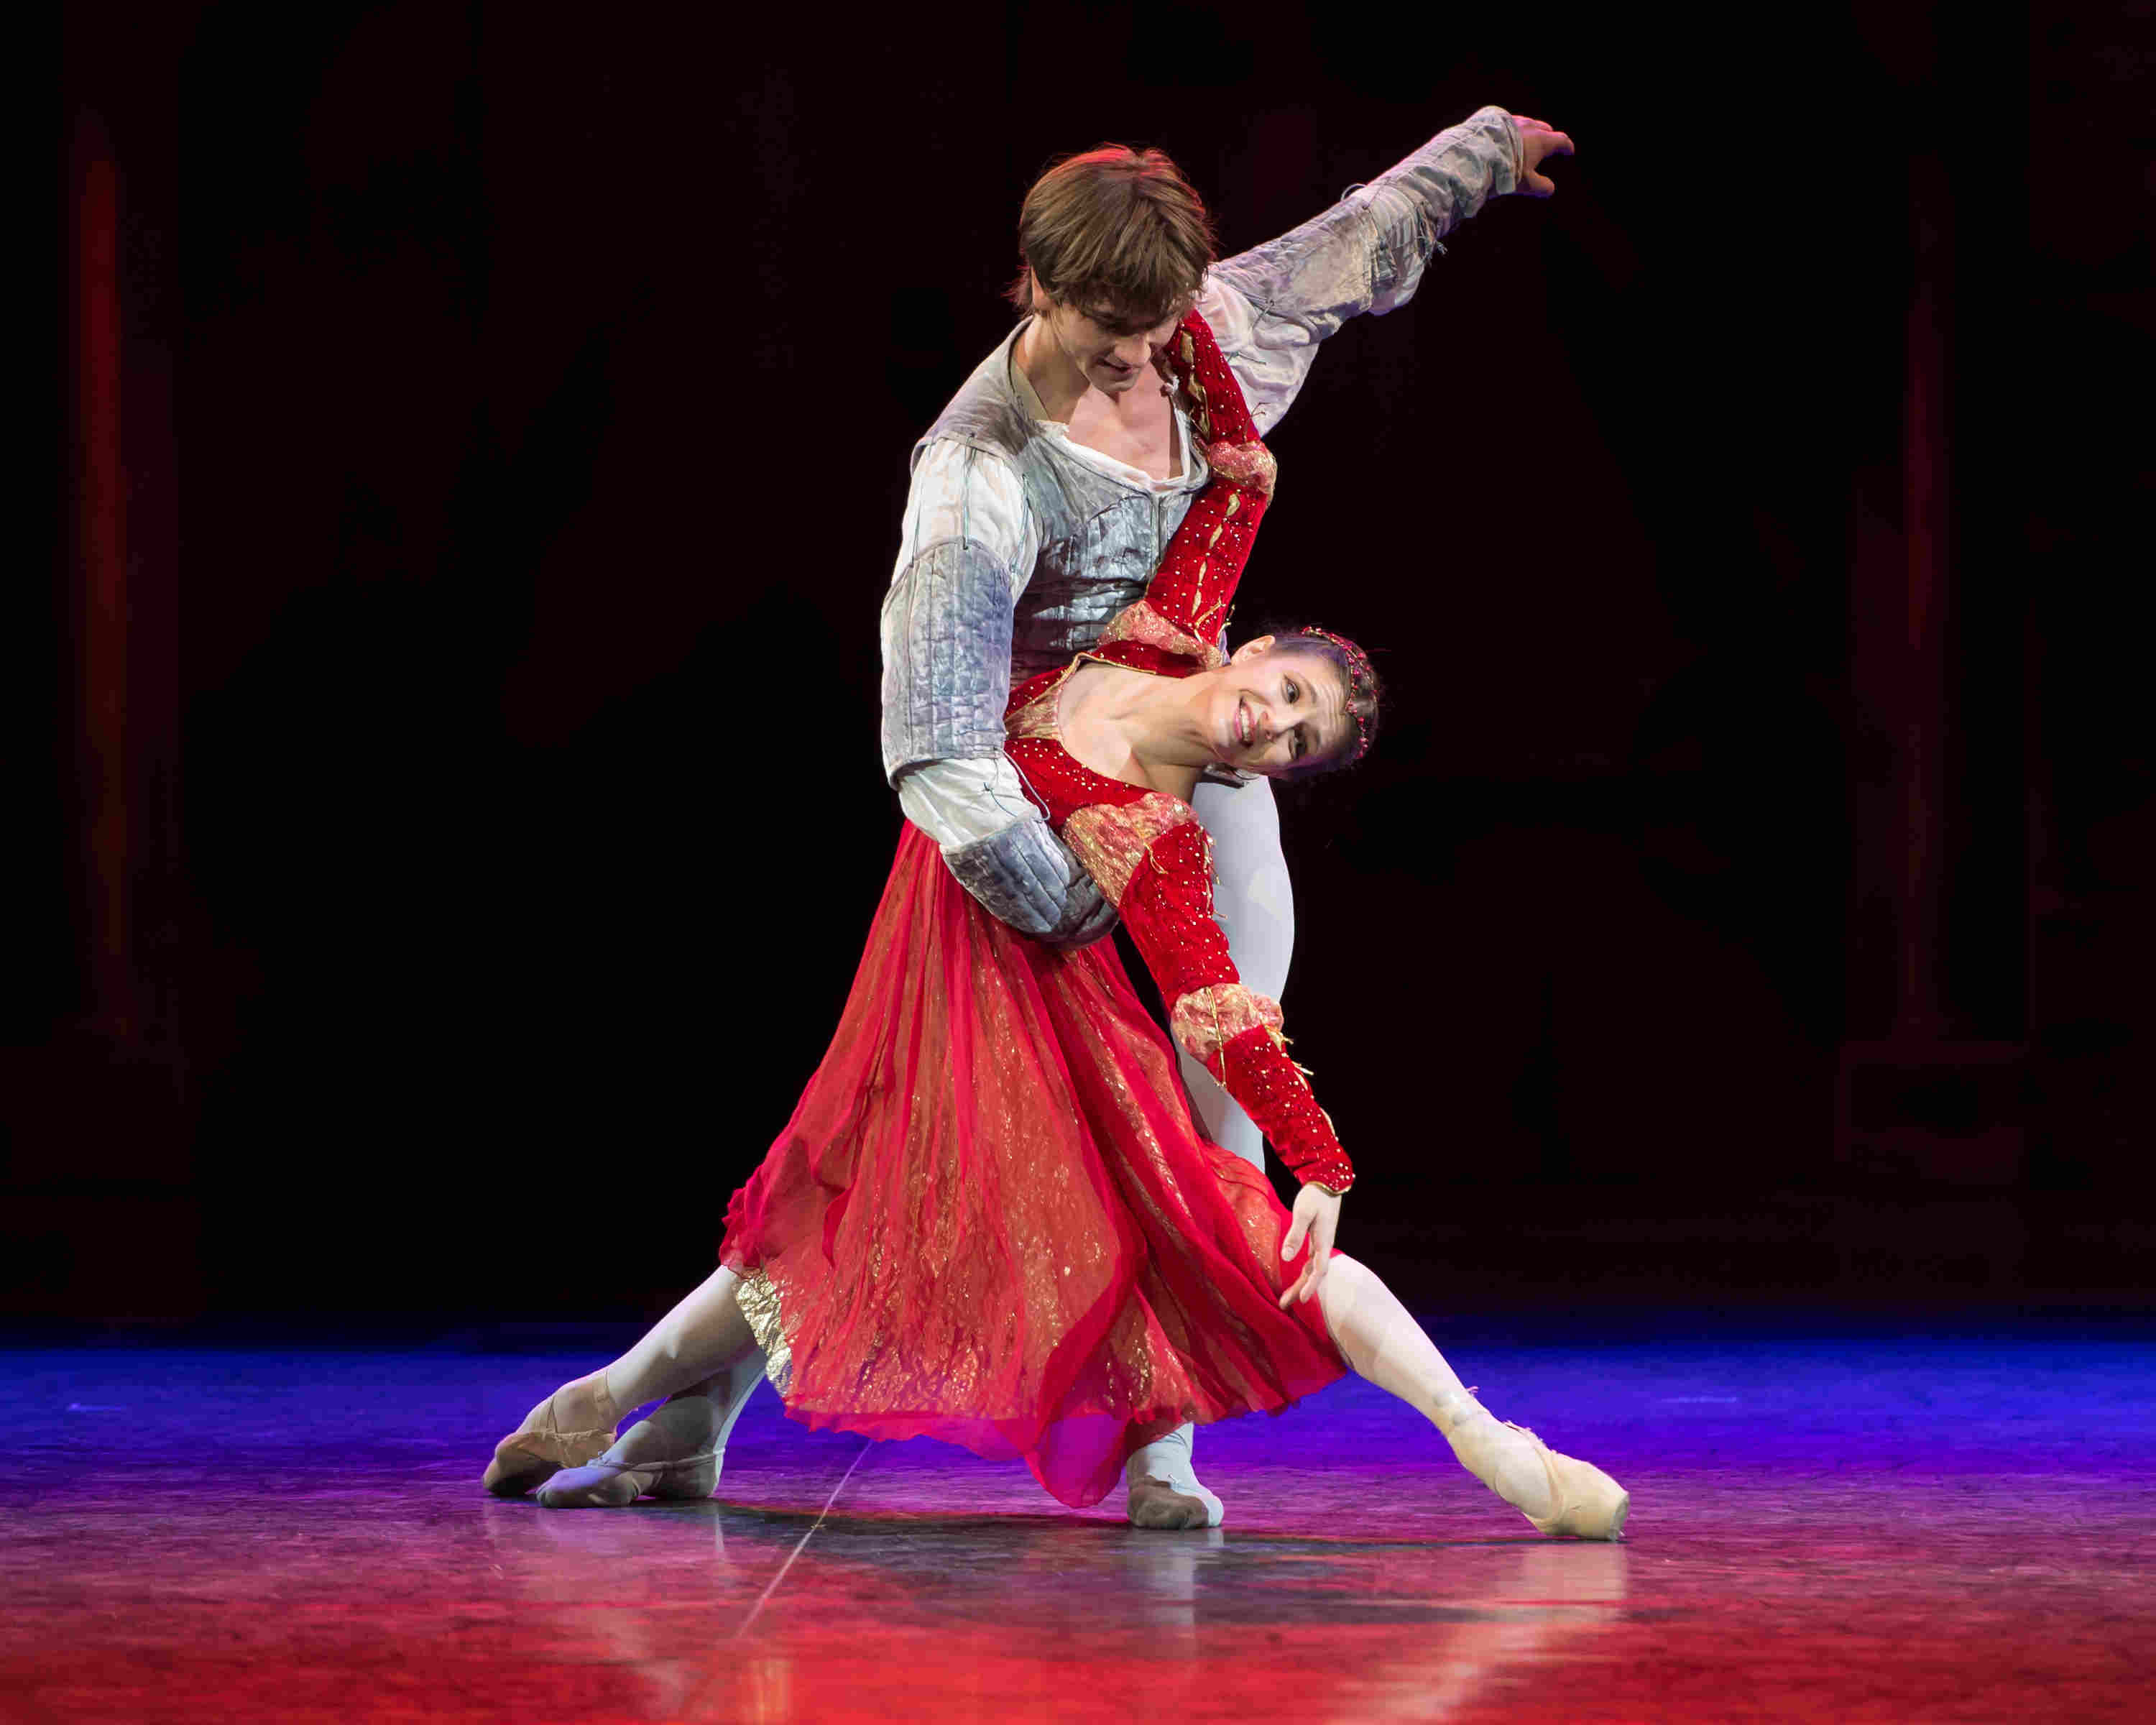 Alina Cojocaru and Friedemann Vogel as Romeo and Juliet at the Royal Albert Hall 